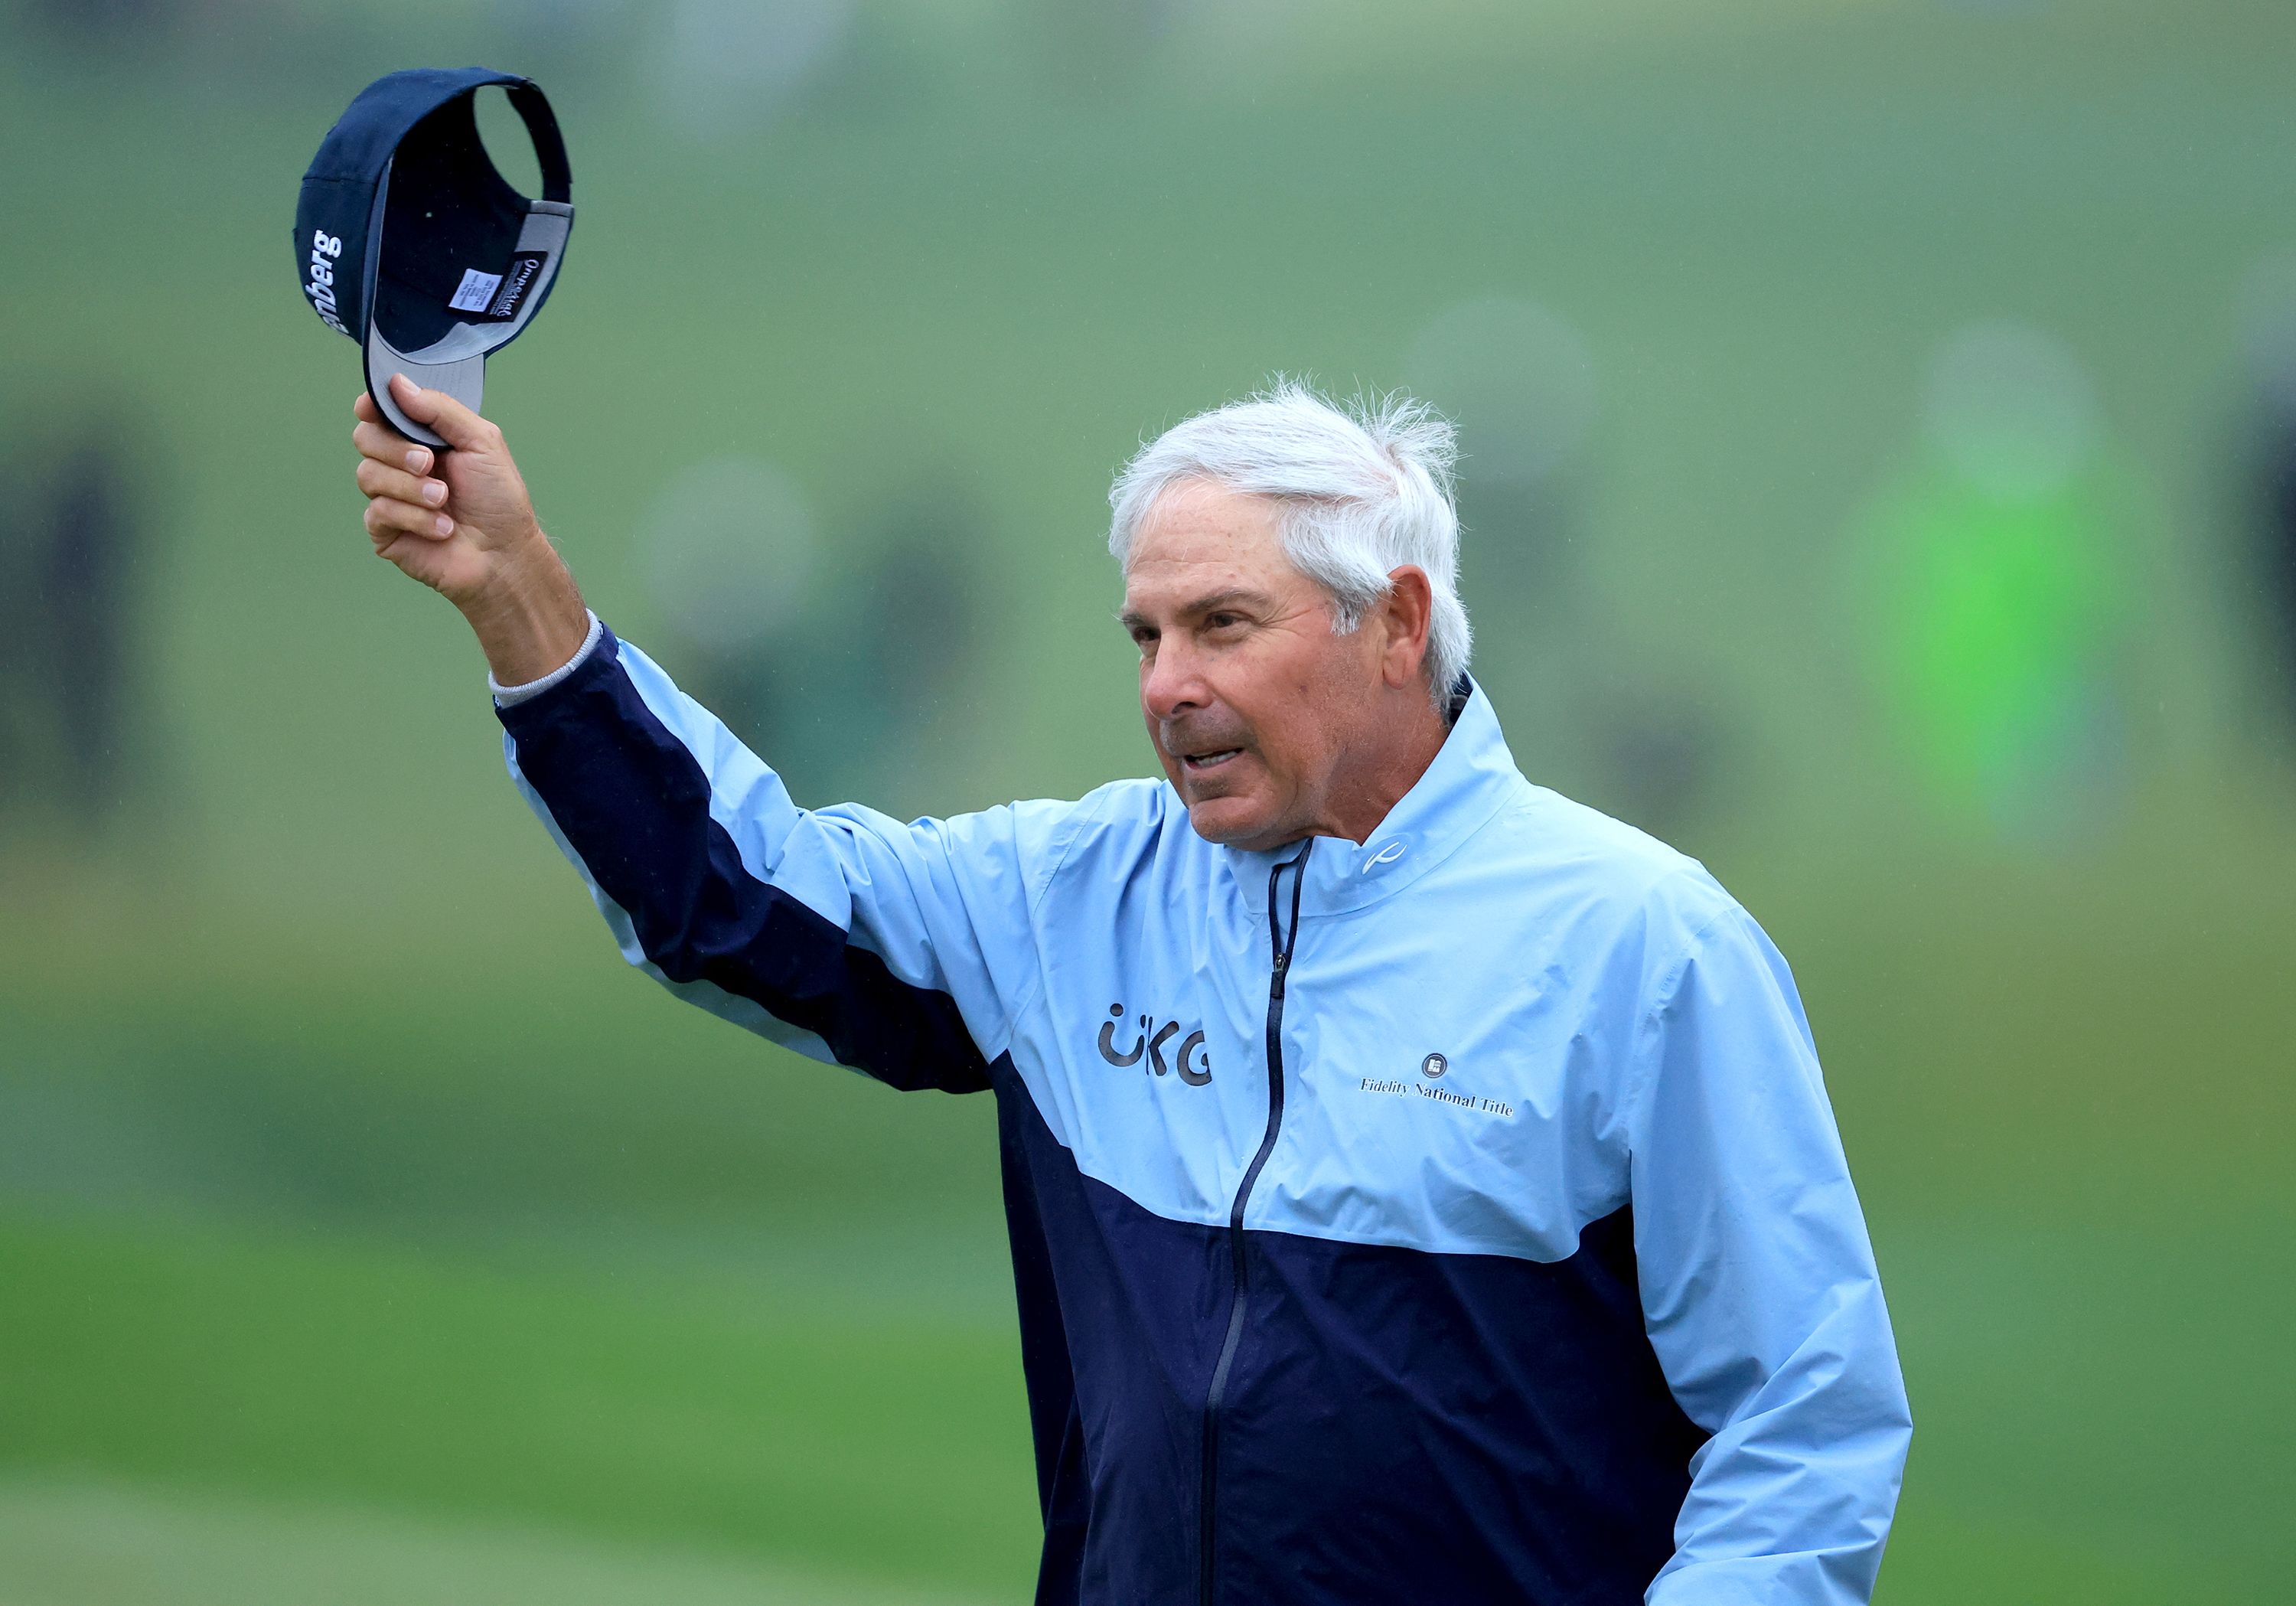 Fred Couples at 63 is the Oldest Player to Make the Cut at The Masters